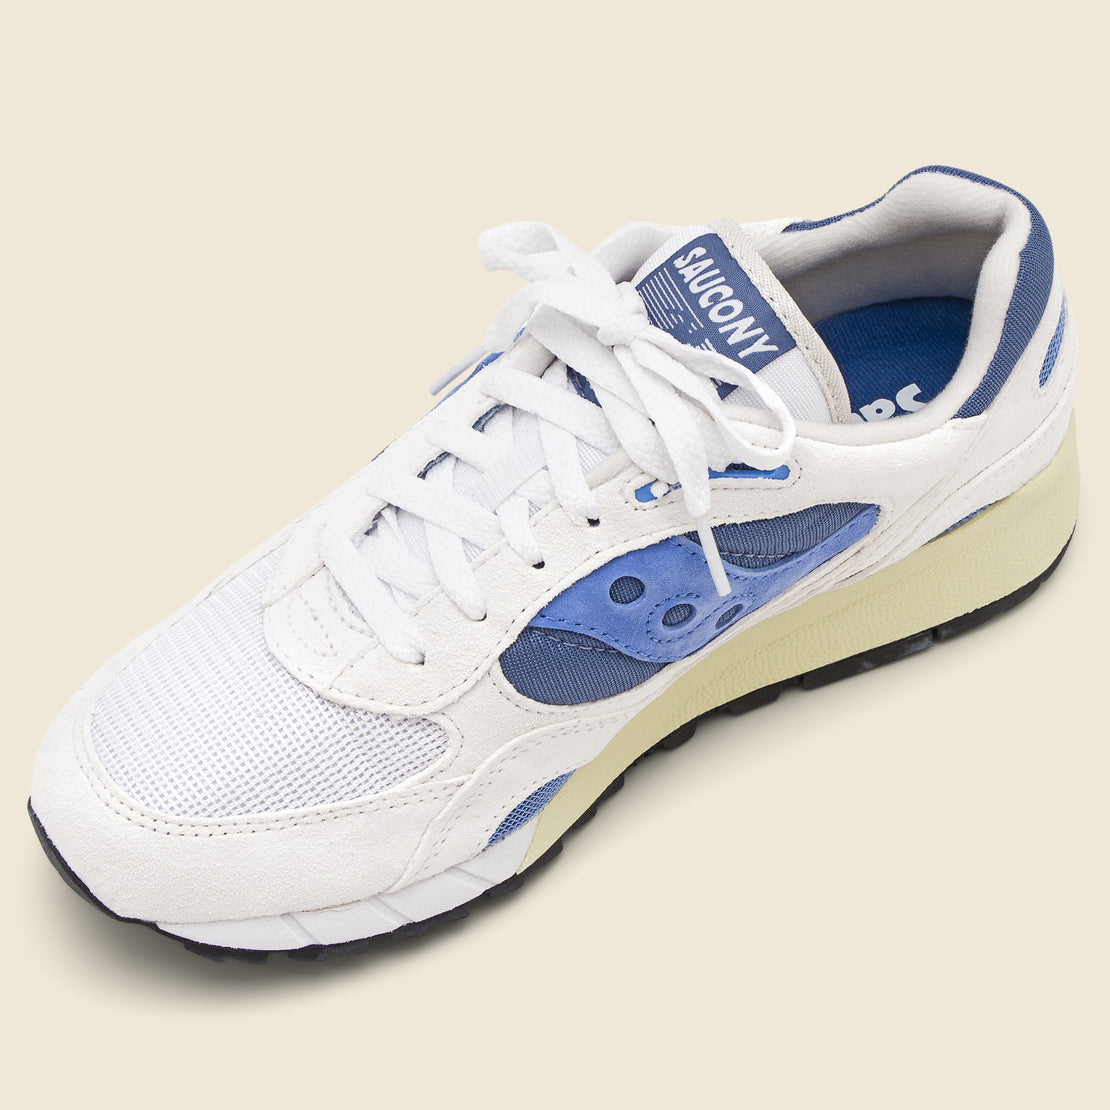 Shadow 6000 Sneaker- White/Blue - Saucony - STAG Provisions - Shoes - Athletic